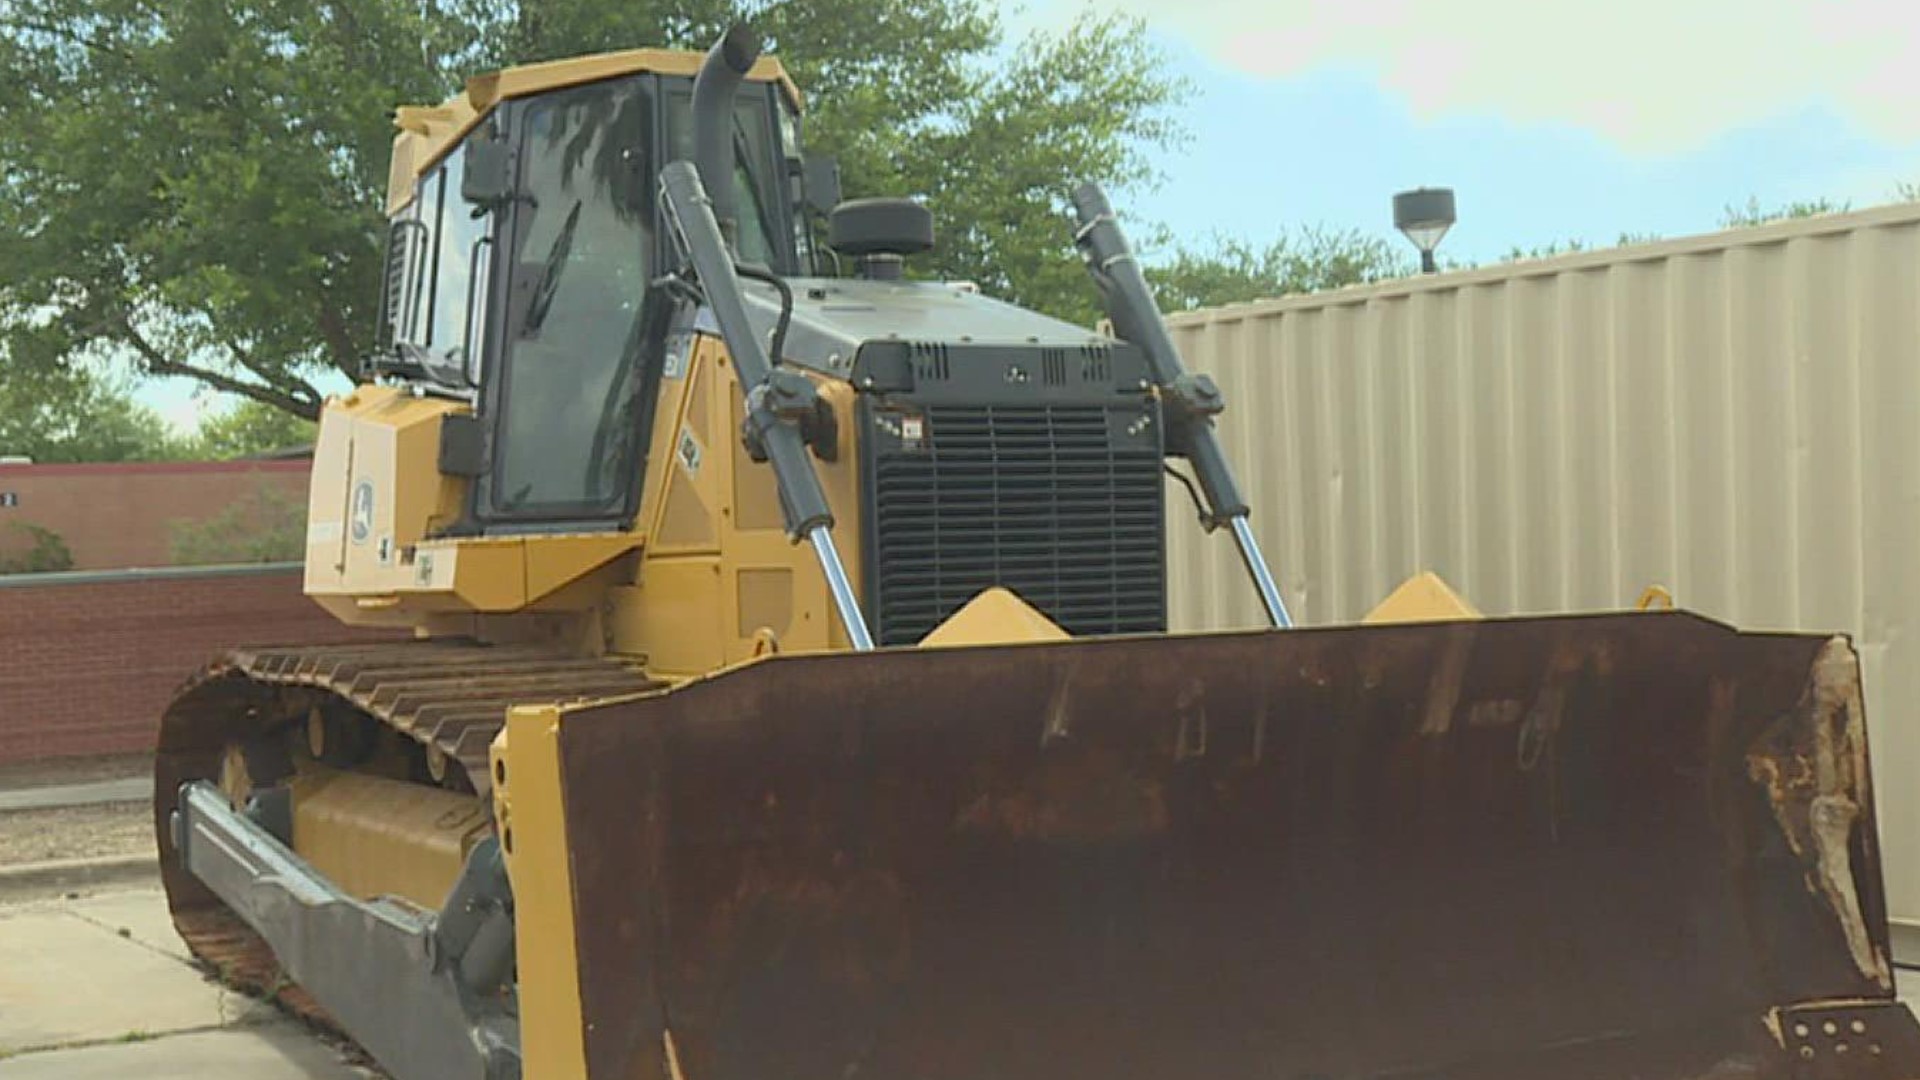 Doggett donated a John Deere 850K Dozer, which is valued at $175,000. The machine will be used to help train students who are learning to become diesel mechanics.